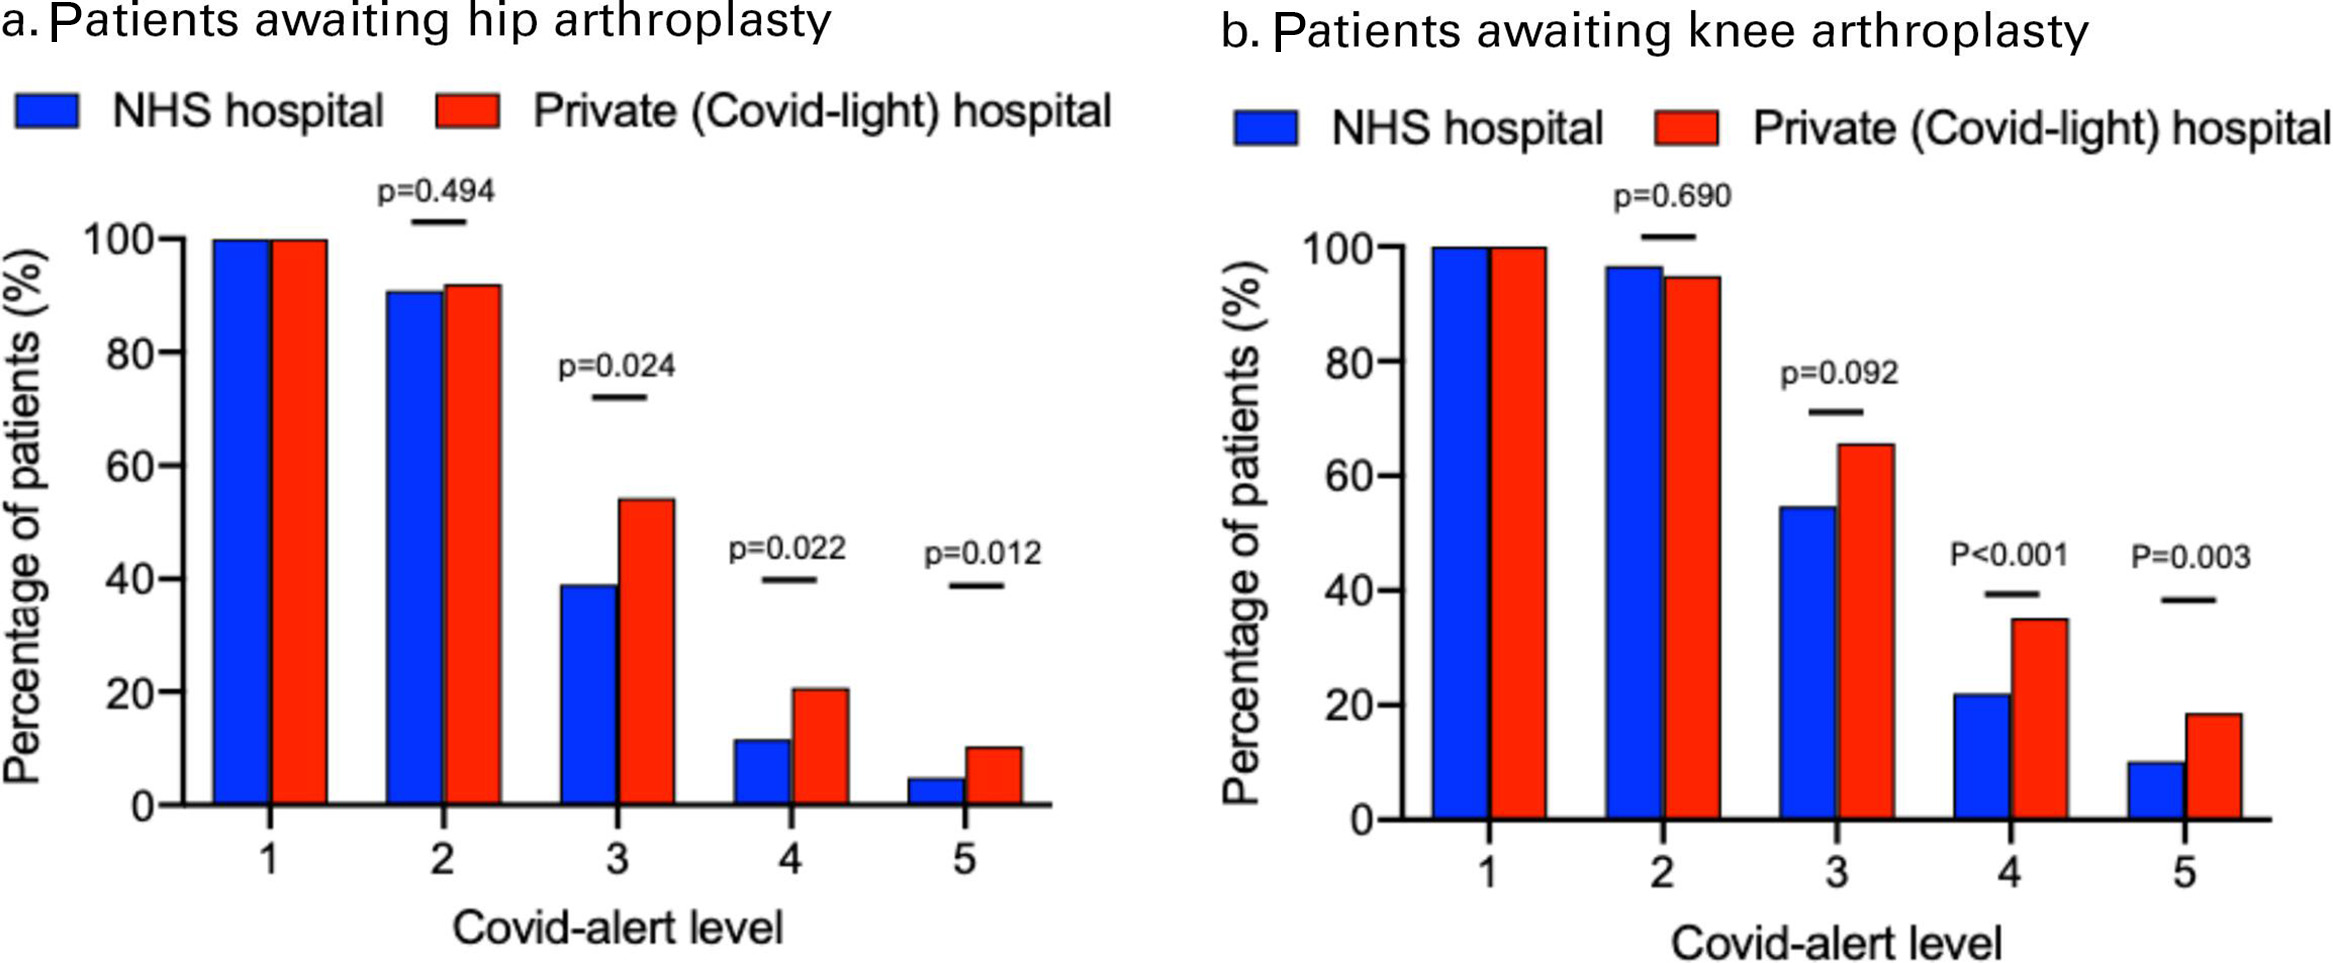 Fig. 2 
            Percentage of patients on the hip and knee arthroplasty waiting list who would be willing to receive a) hip arthroplasty and b) knee arthroplasty at each of the five COVID-19 alert levels (Table I) in either an NHS hospital (blue bars) or a private sector (COVID-light) hospital (red bars). Exact p-values displayed, binomial paired comparison.
          